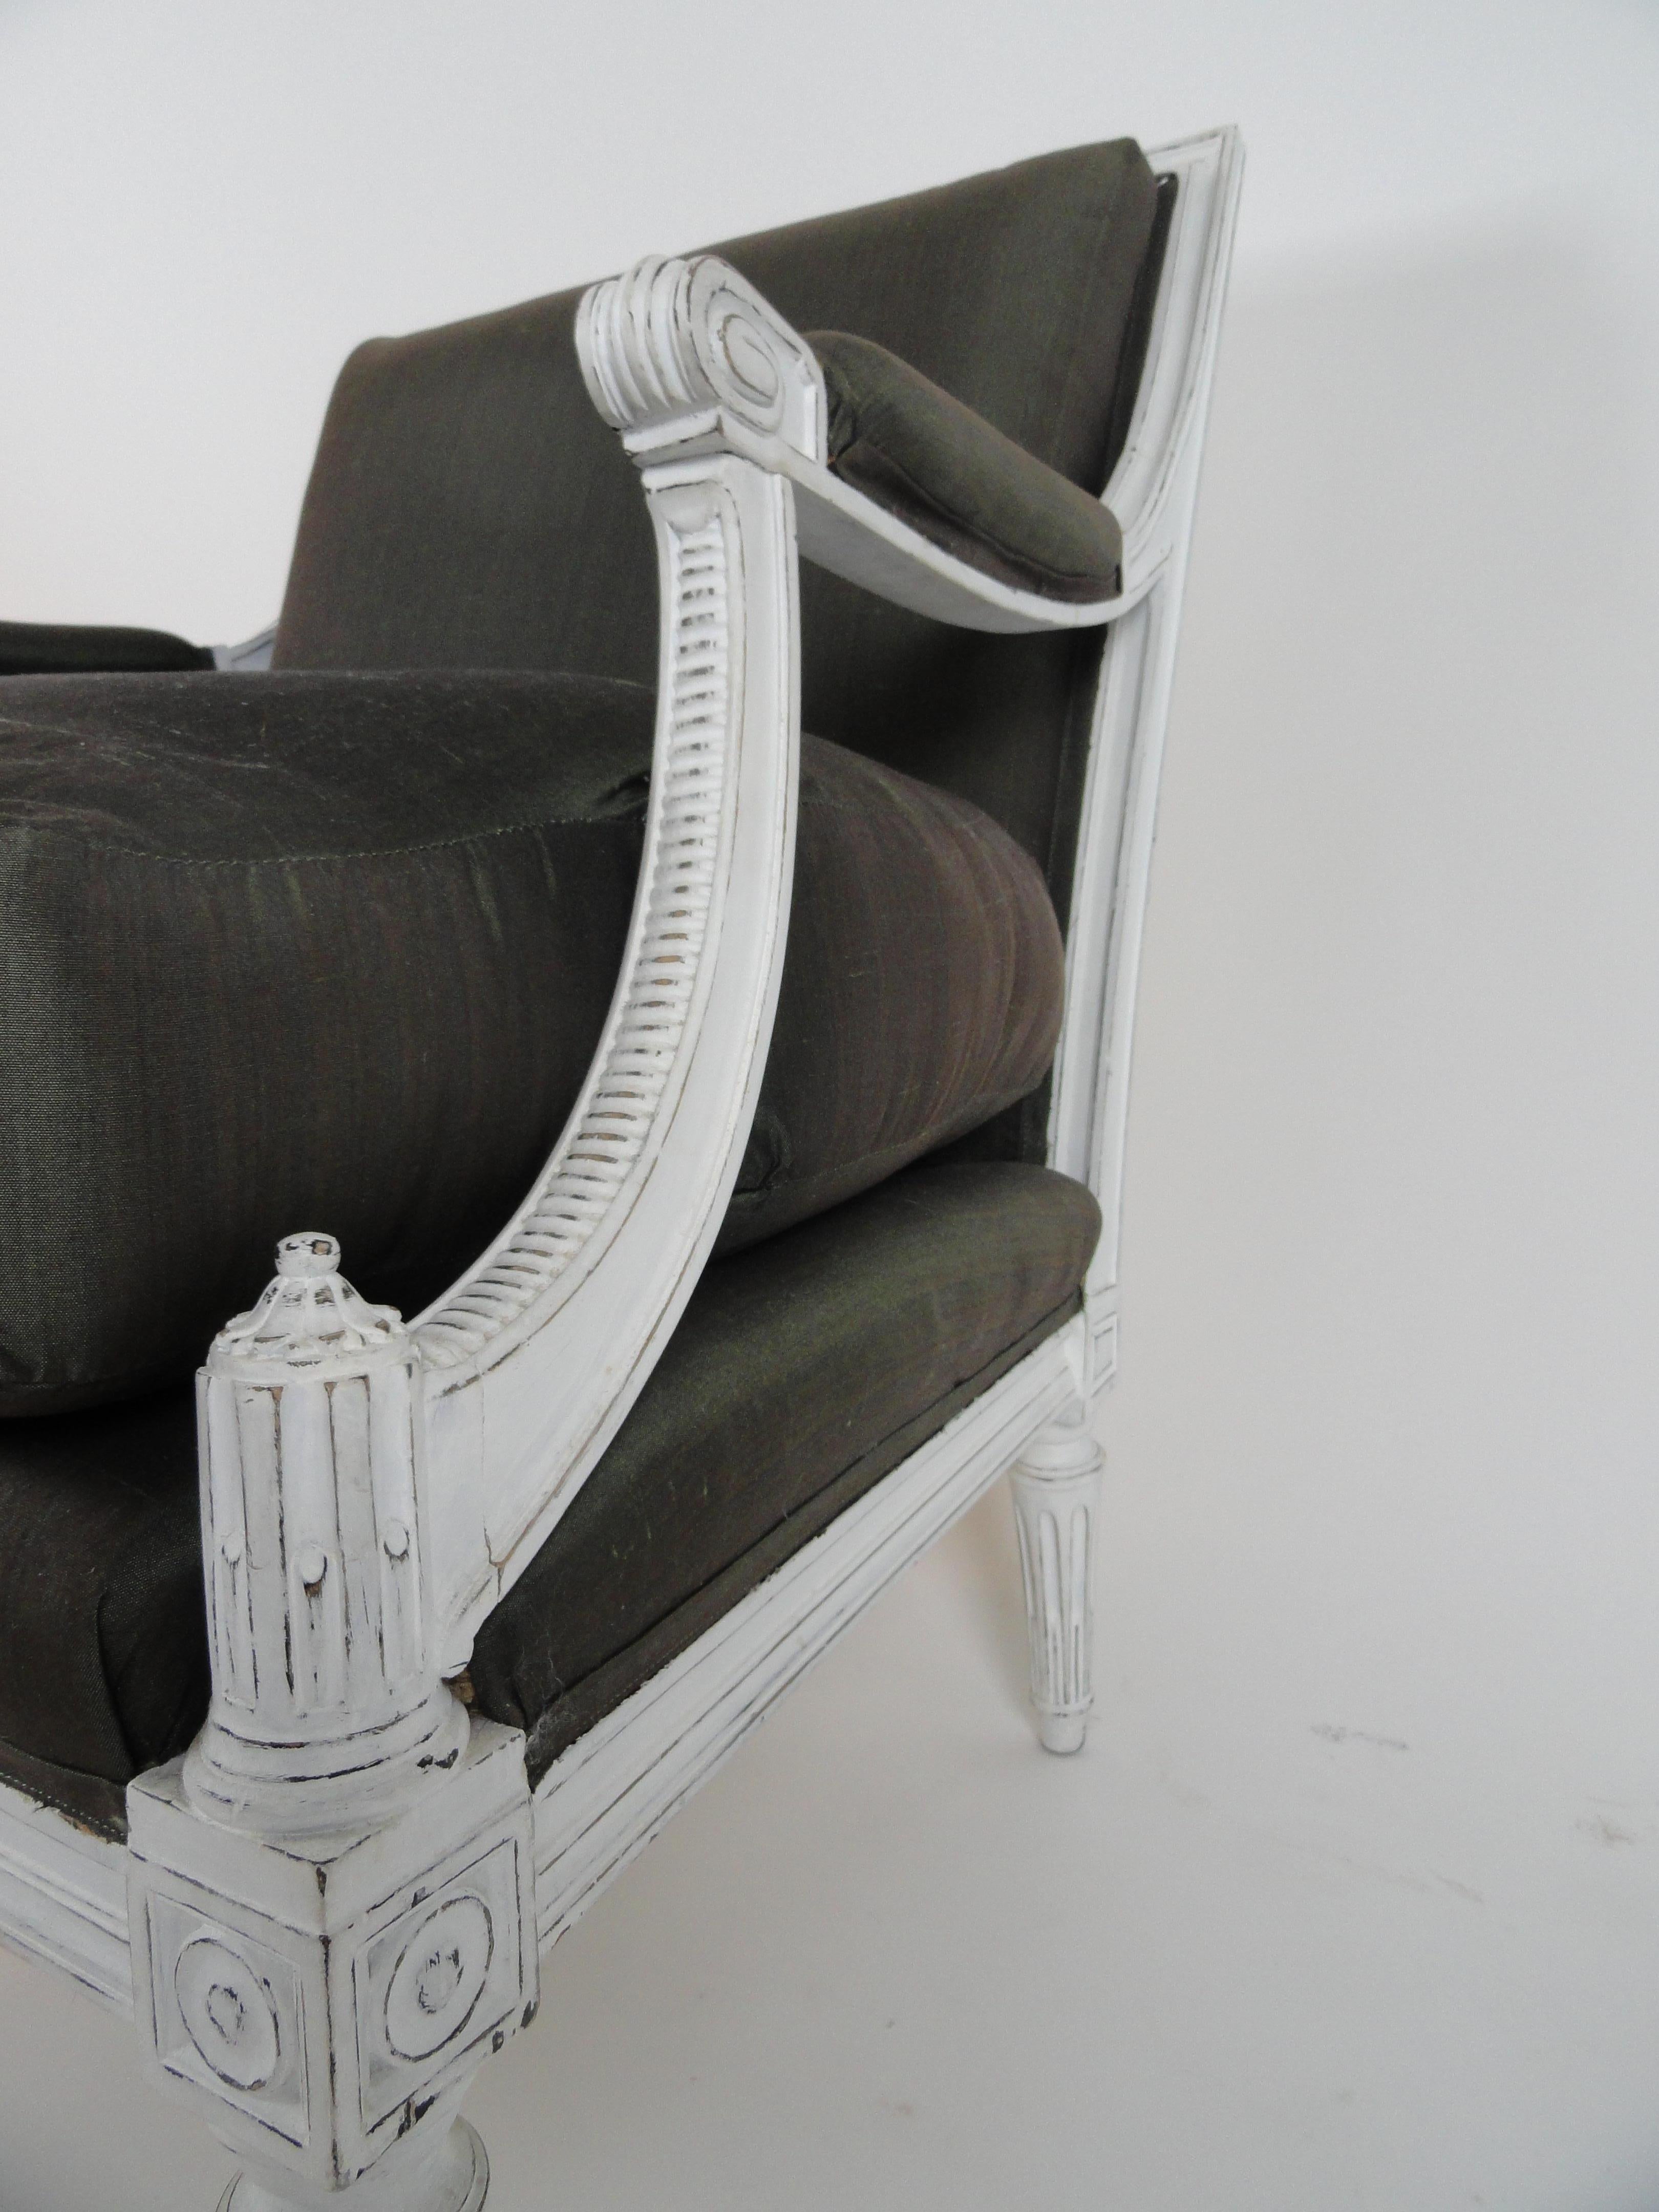 Maison Jansen Louis XVI style armchair or fauteuil. Wood painted white, newer finish, and distressed. Upholstered in Henry Calvin Athena Taffeta (50% silk, 50% cotton). Comfortable.